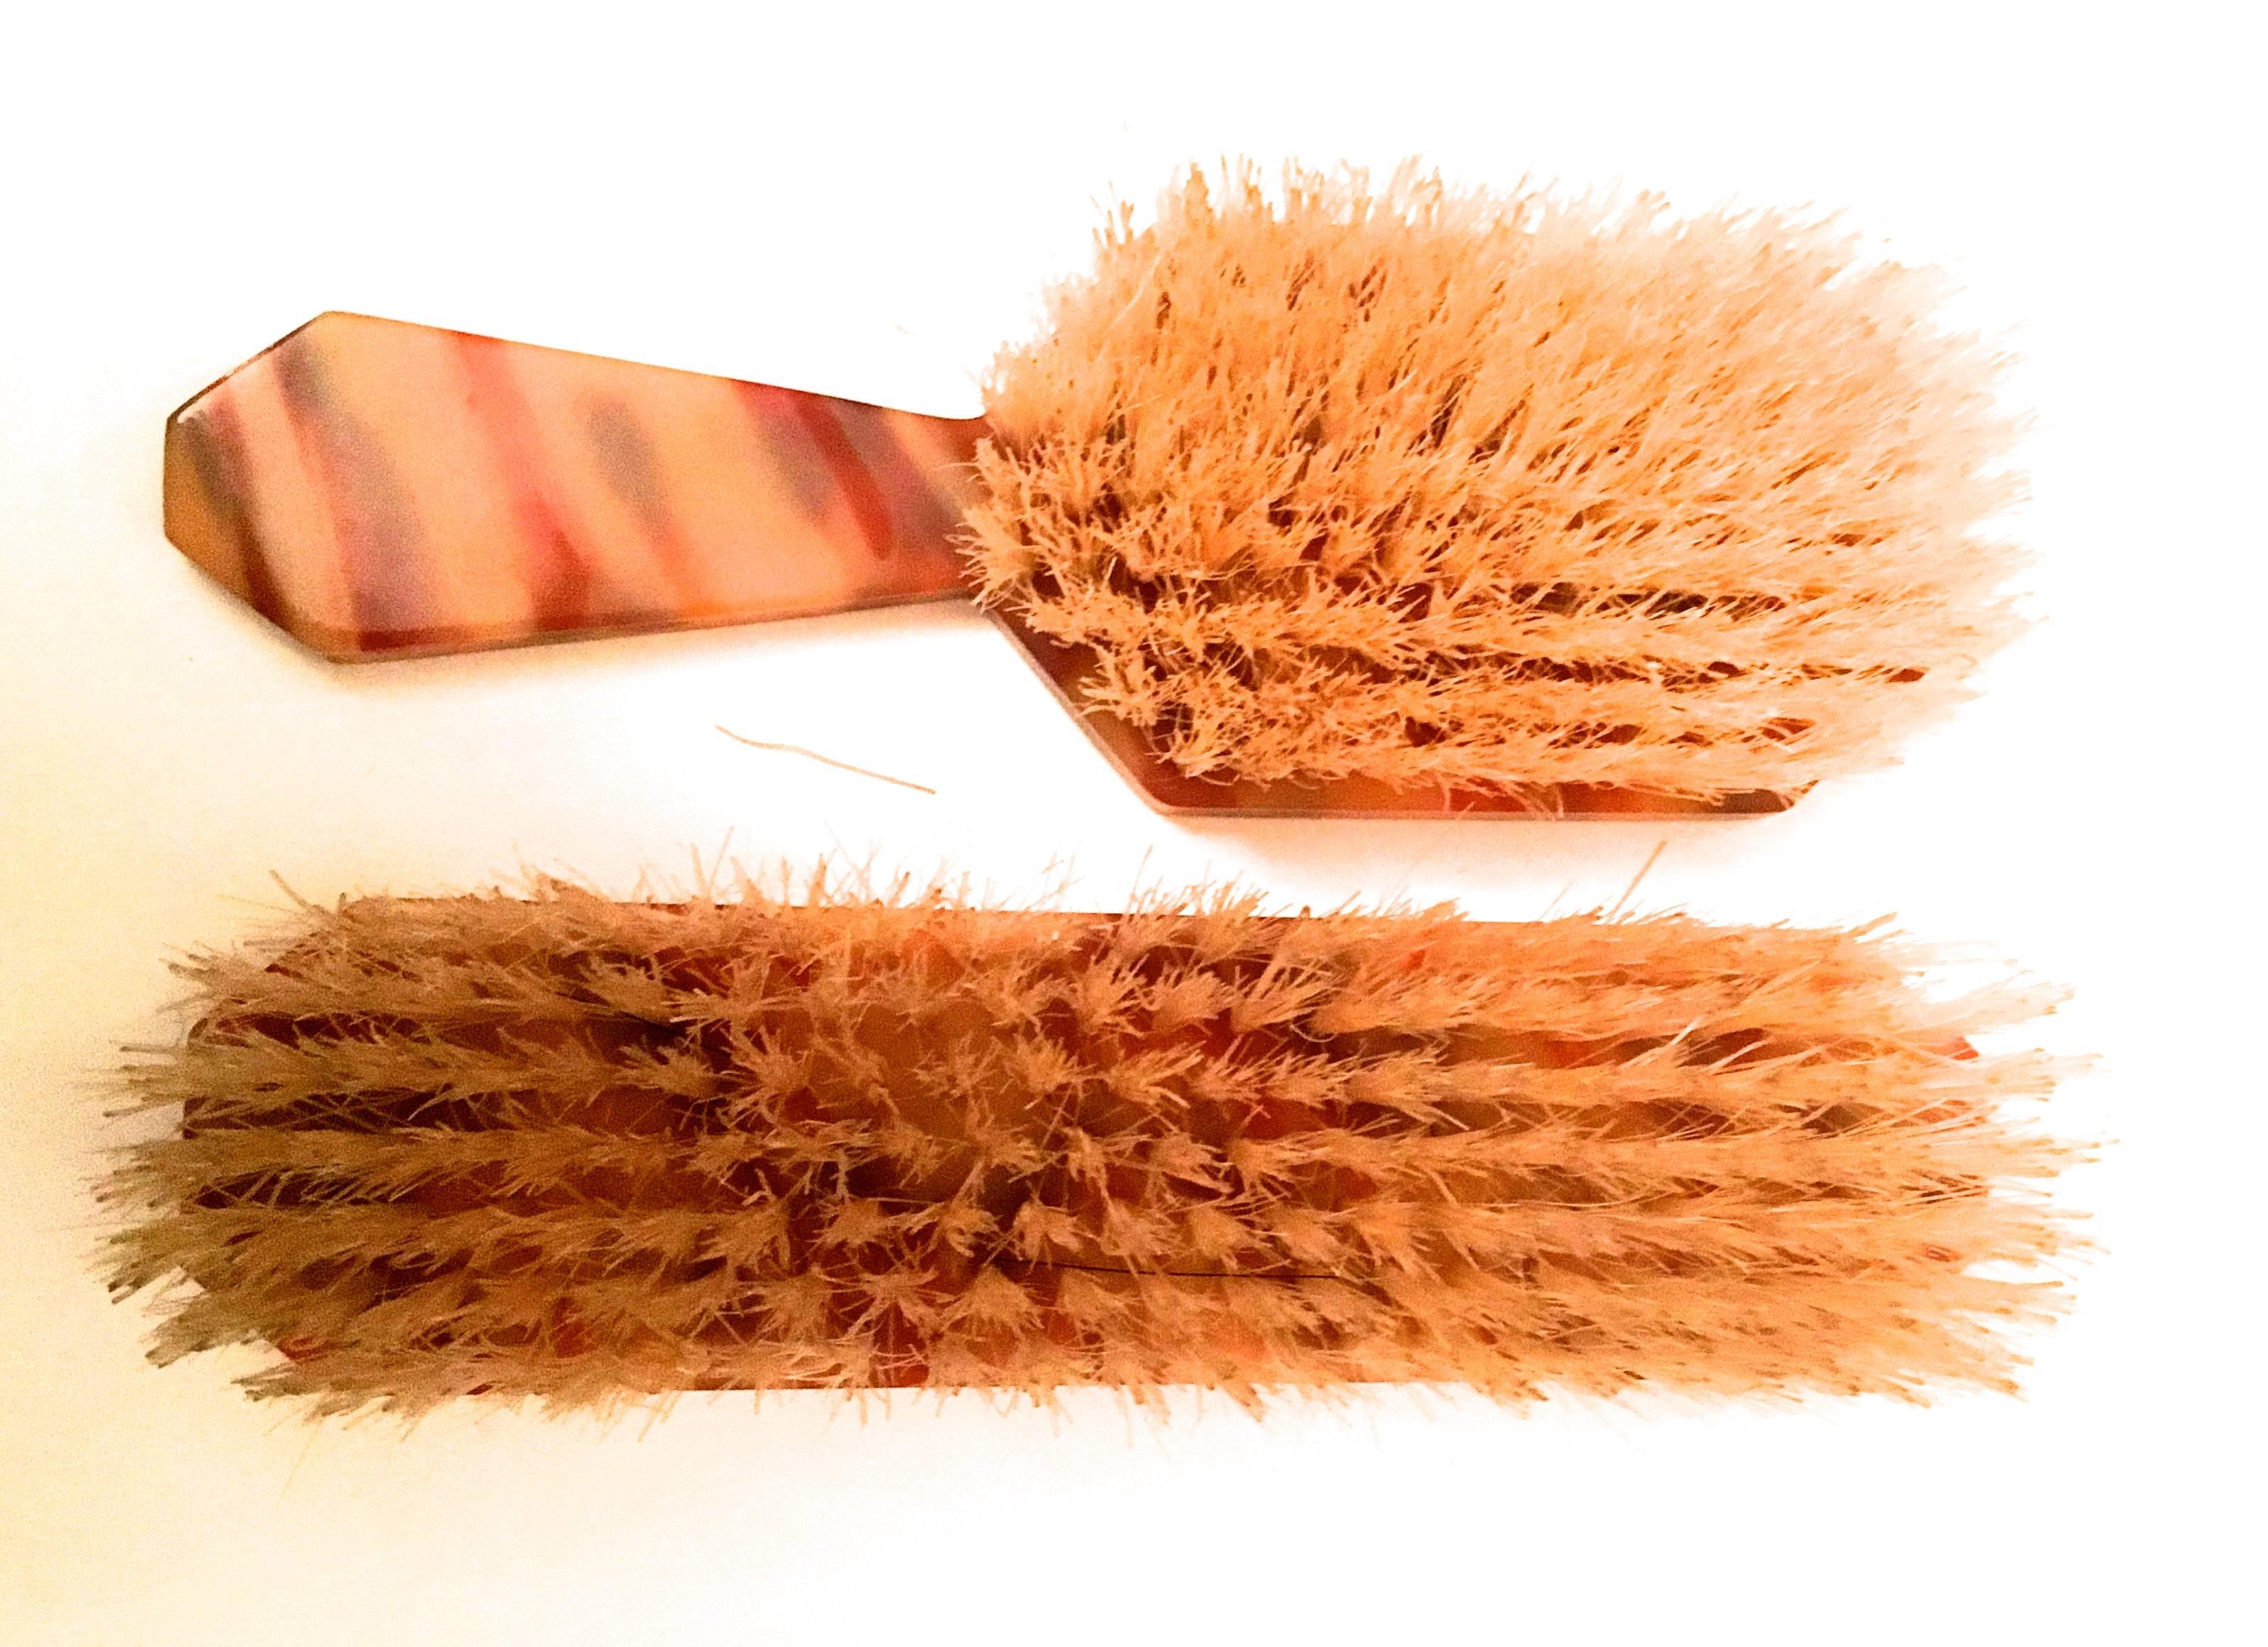 Presented here is a set of vanity hair brushes from the 1940's. This beautiful set of vanity brushes is made from bakelite. This particular color combination of bakelite is quite unusual and extremely rare. The pair of brushes are in excellent